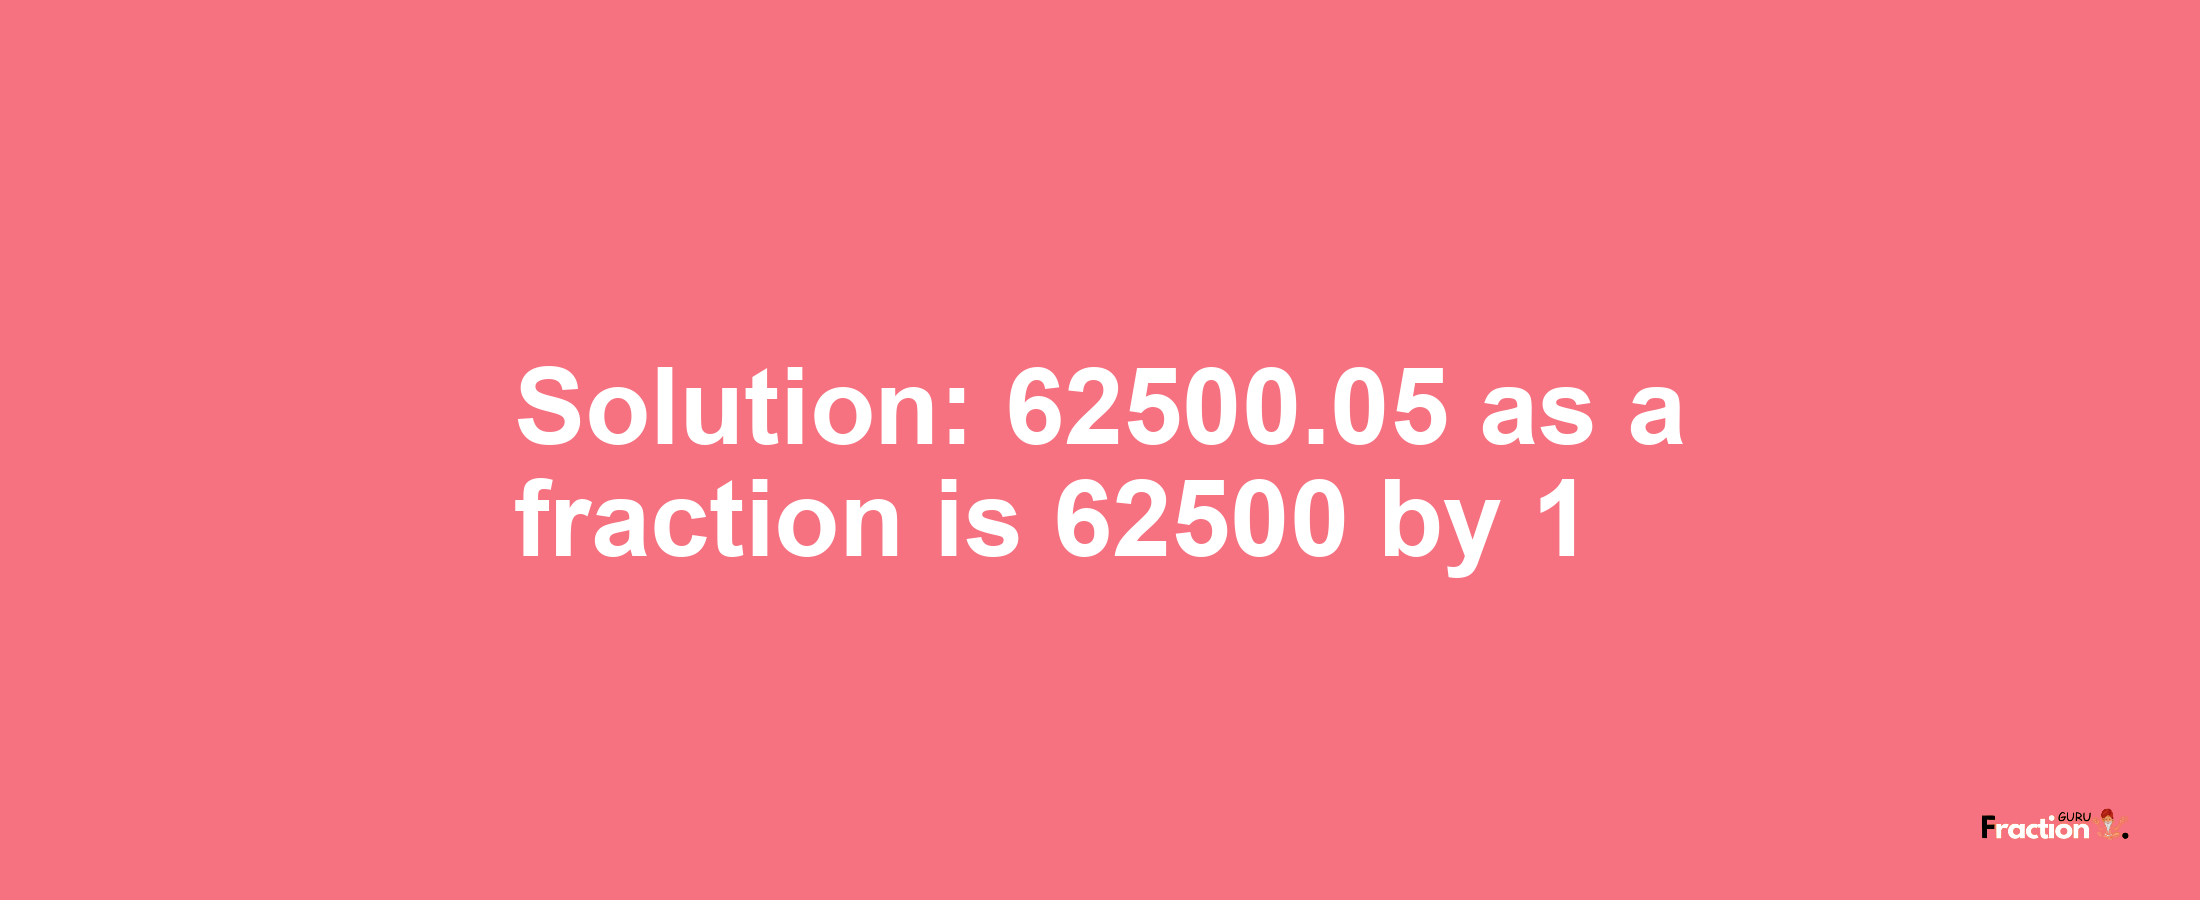 Solution:62500.05 as a fraction is 62500/1